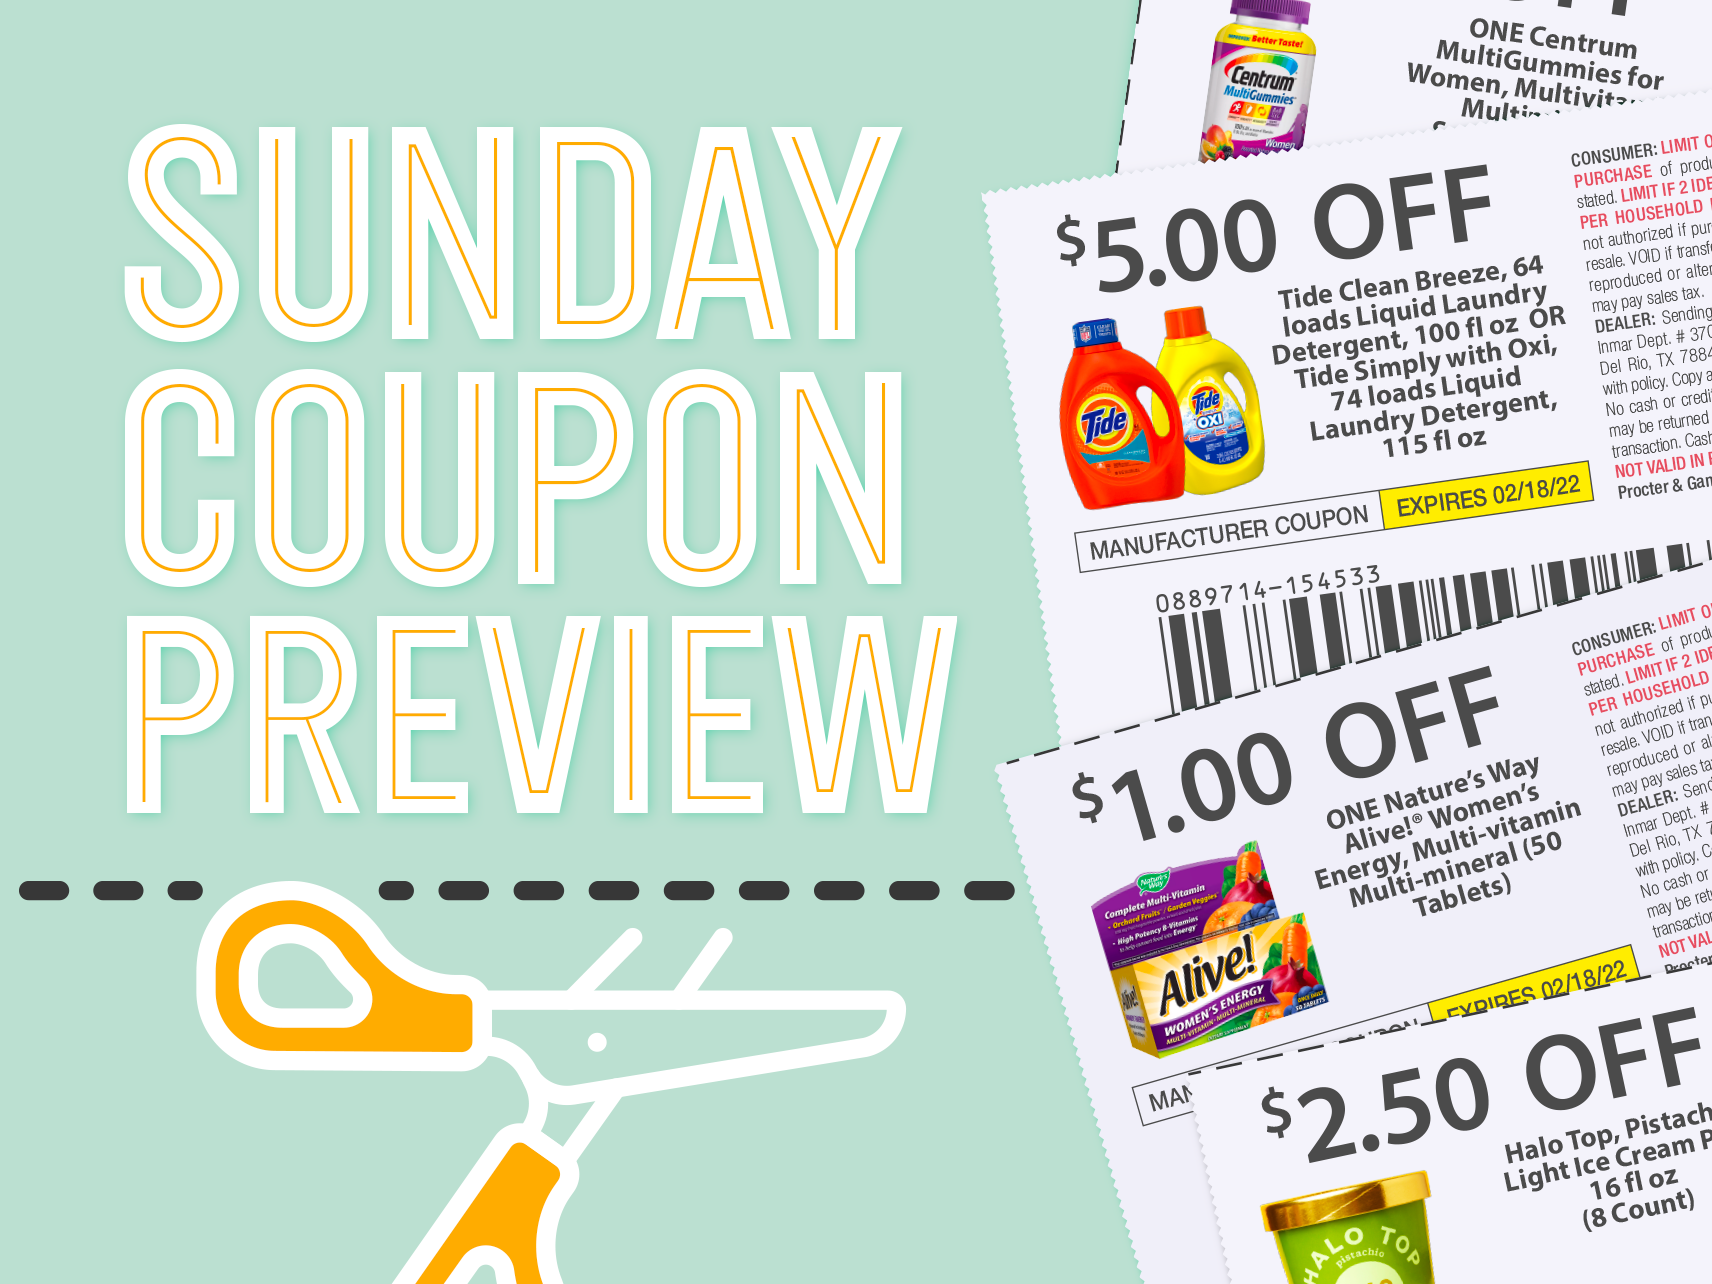 Sunday Coupon Preview For 12/4 – Two Inserts